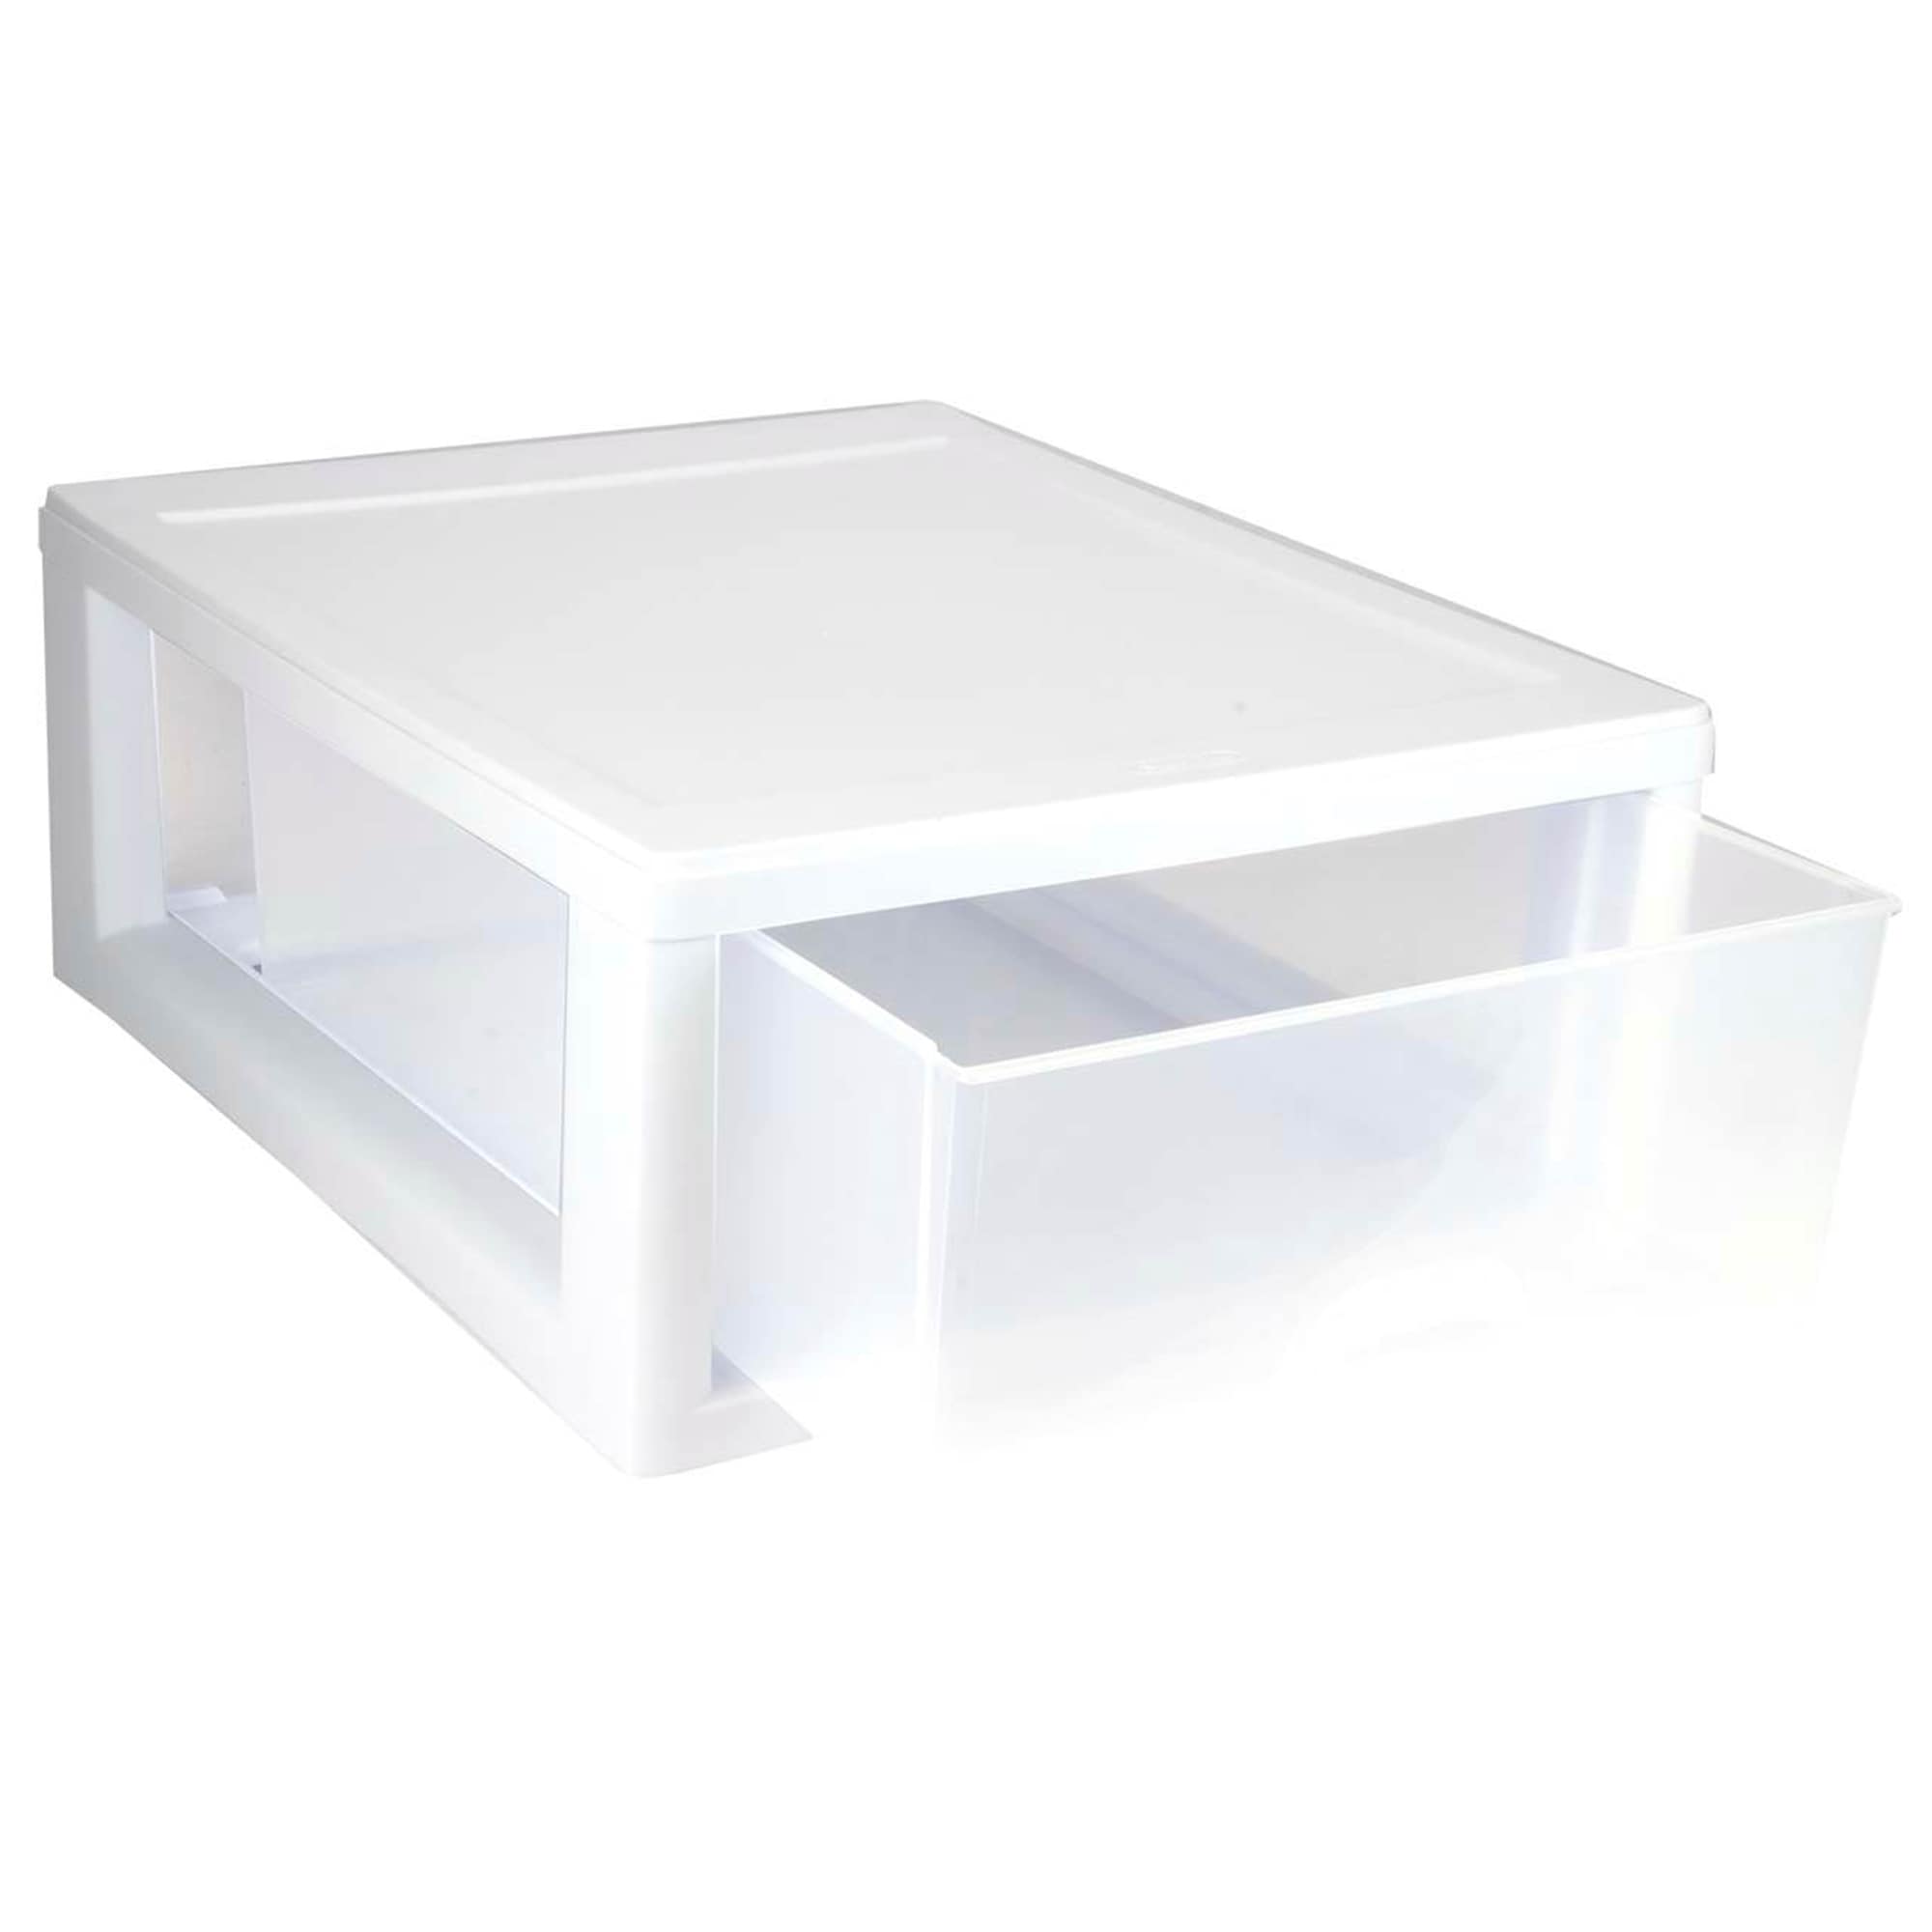 https://ak1.ostkcdn.com/images/products/is/images/direct/9f986bc505b8e969f692cb85fbde9f7fe9eb52bc/Sterilite-16-Qt-Single-Box-Modular-Stacking-Storage-Drawer-Container-%2824-Pack%29.jpg